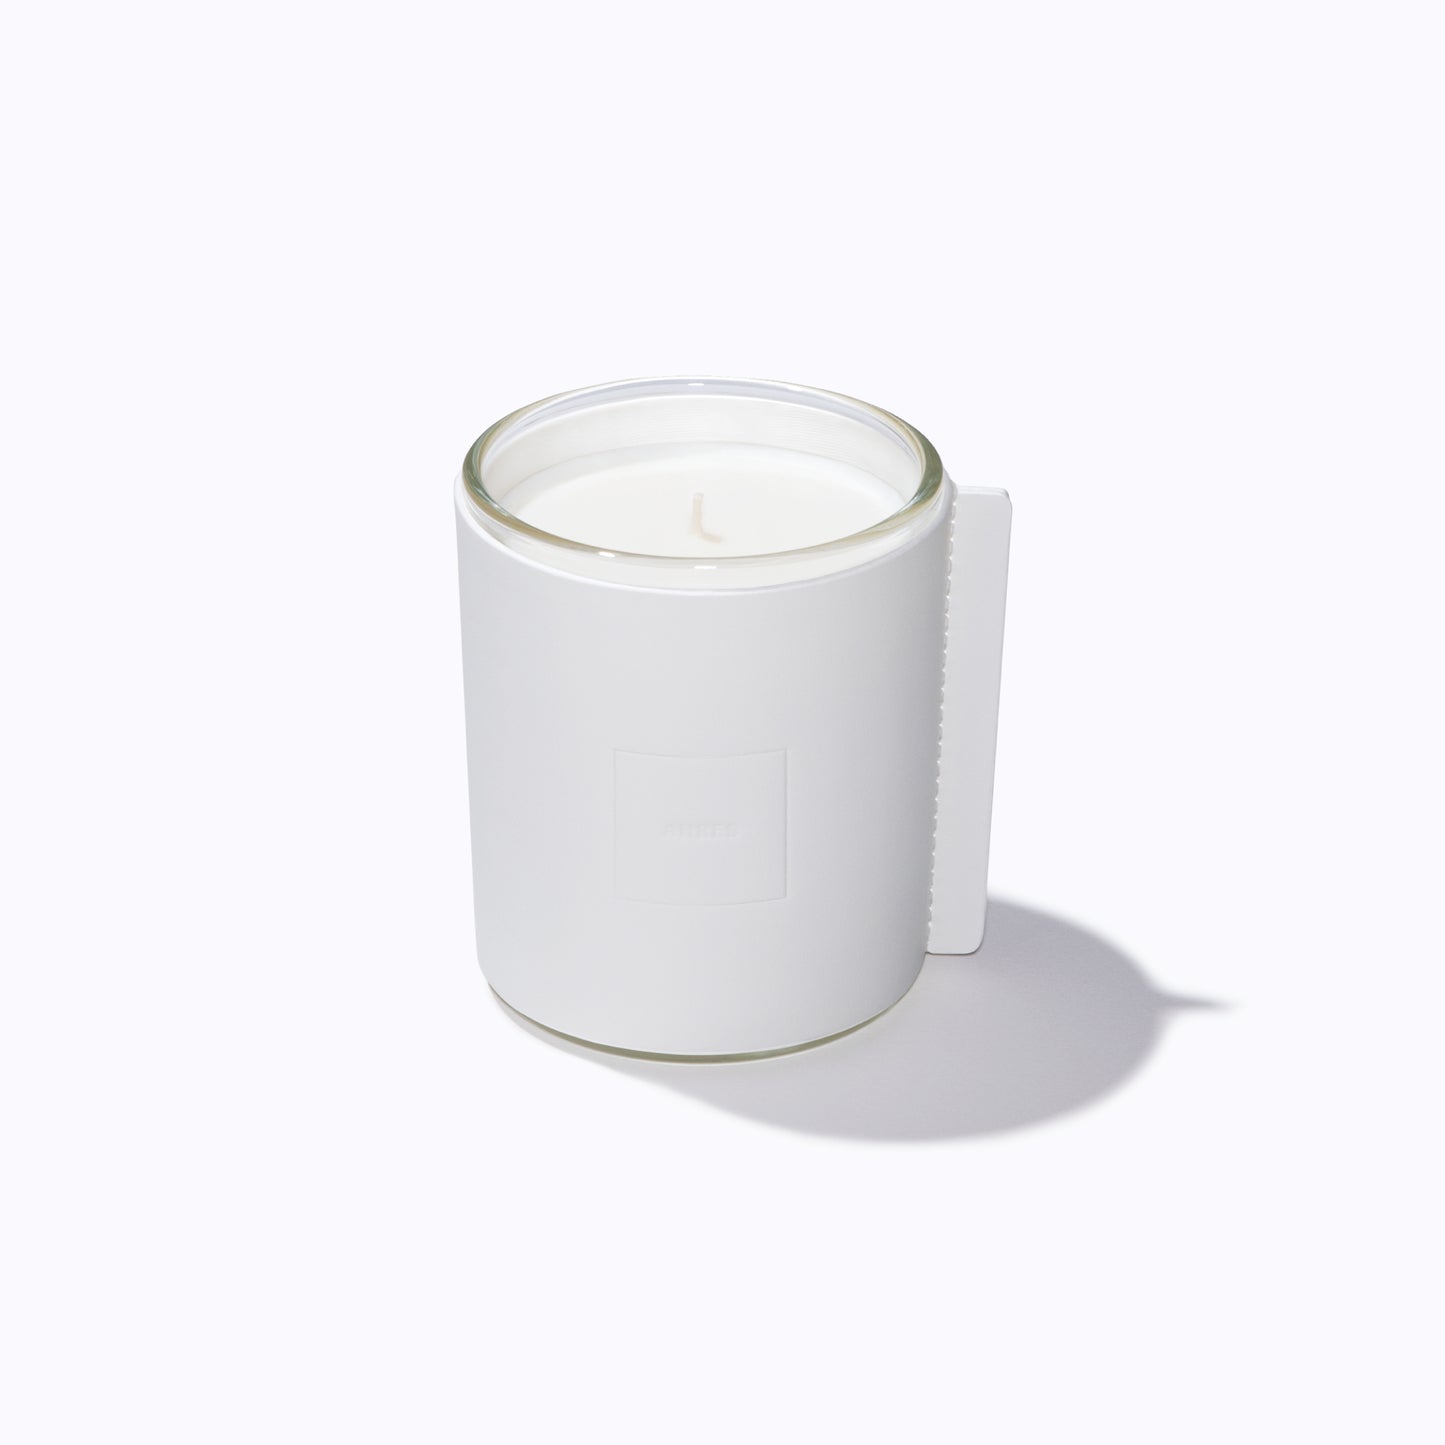 Sound Perfume Candle #Swallow Escapism